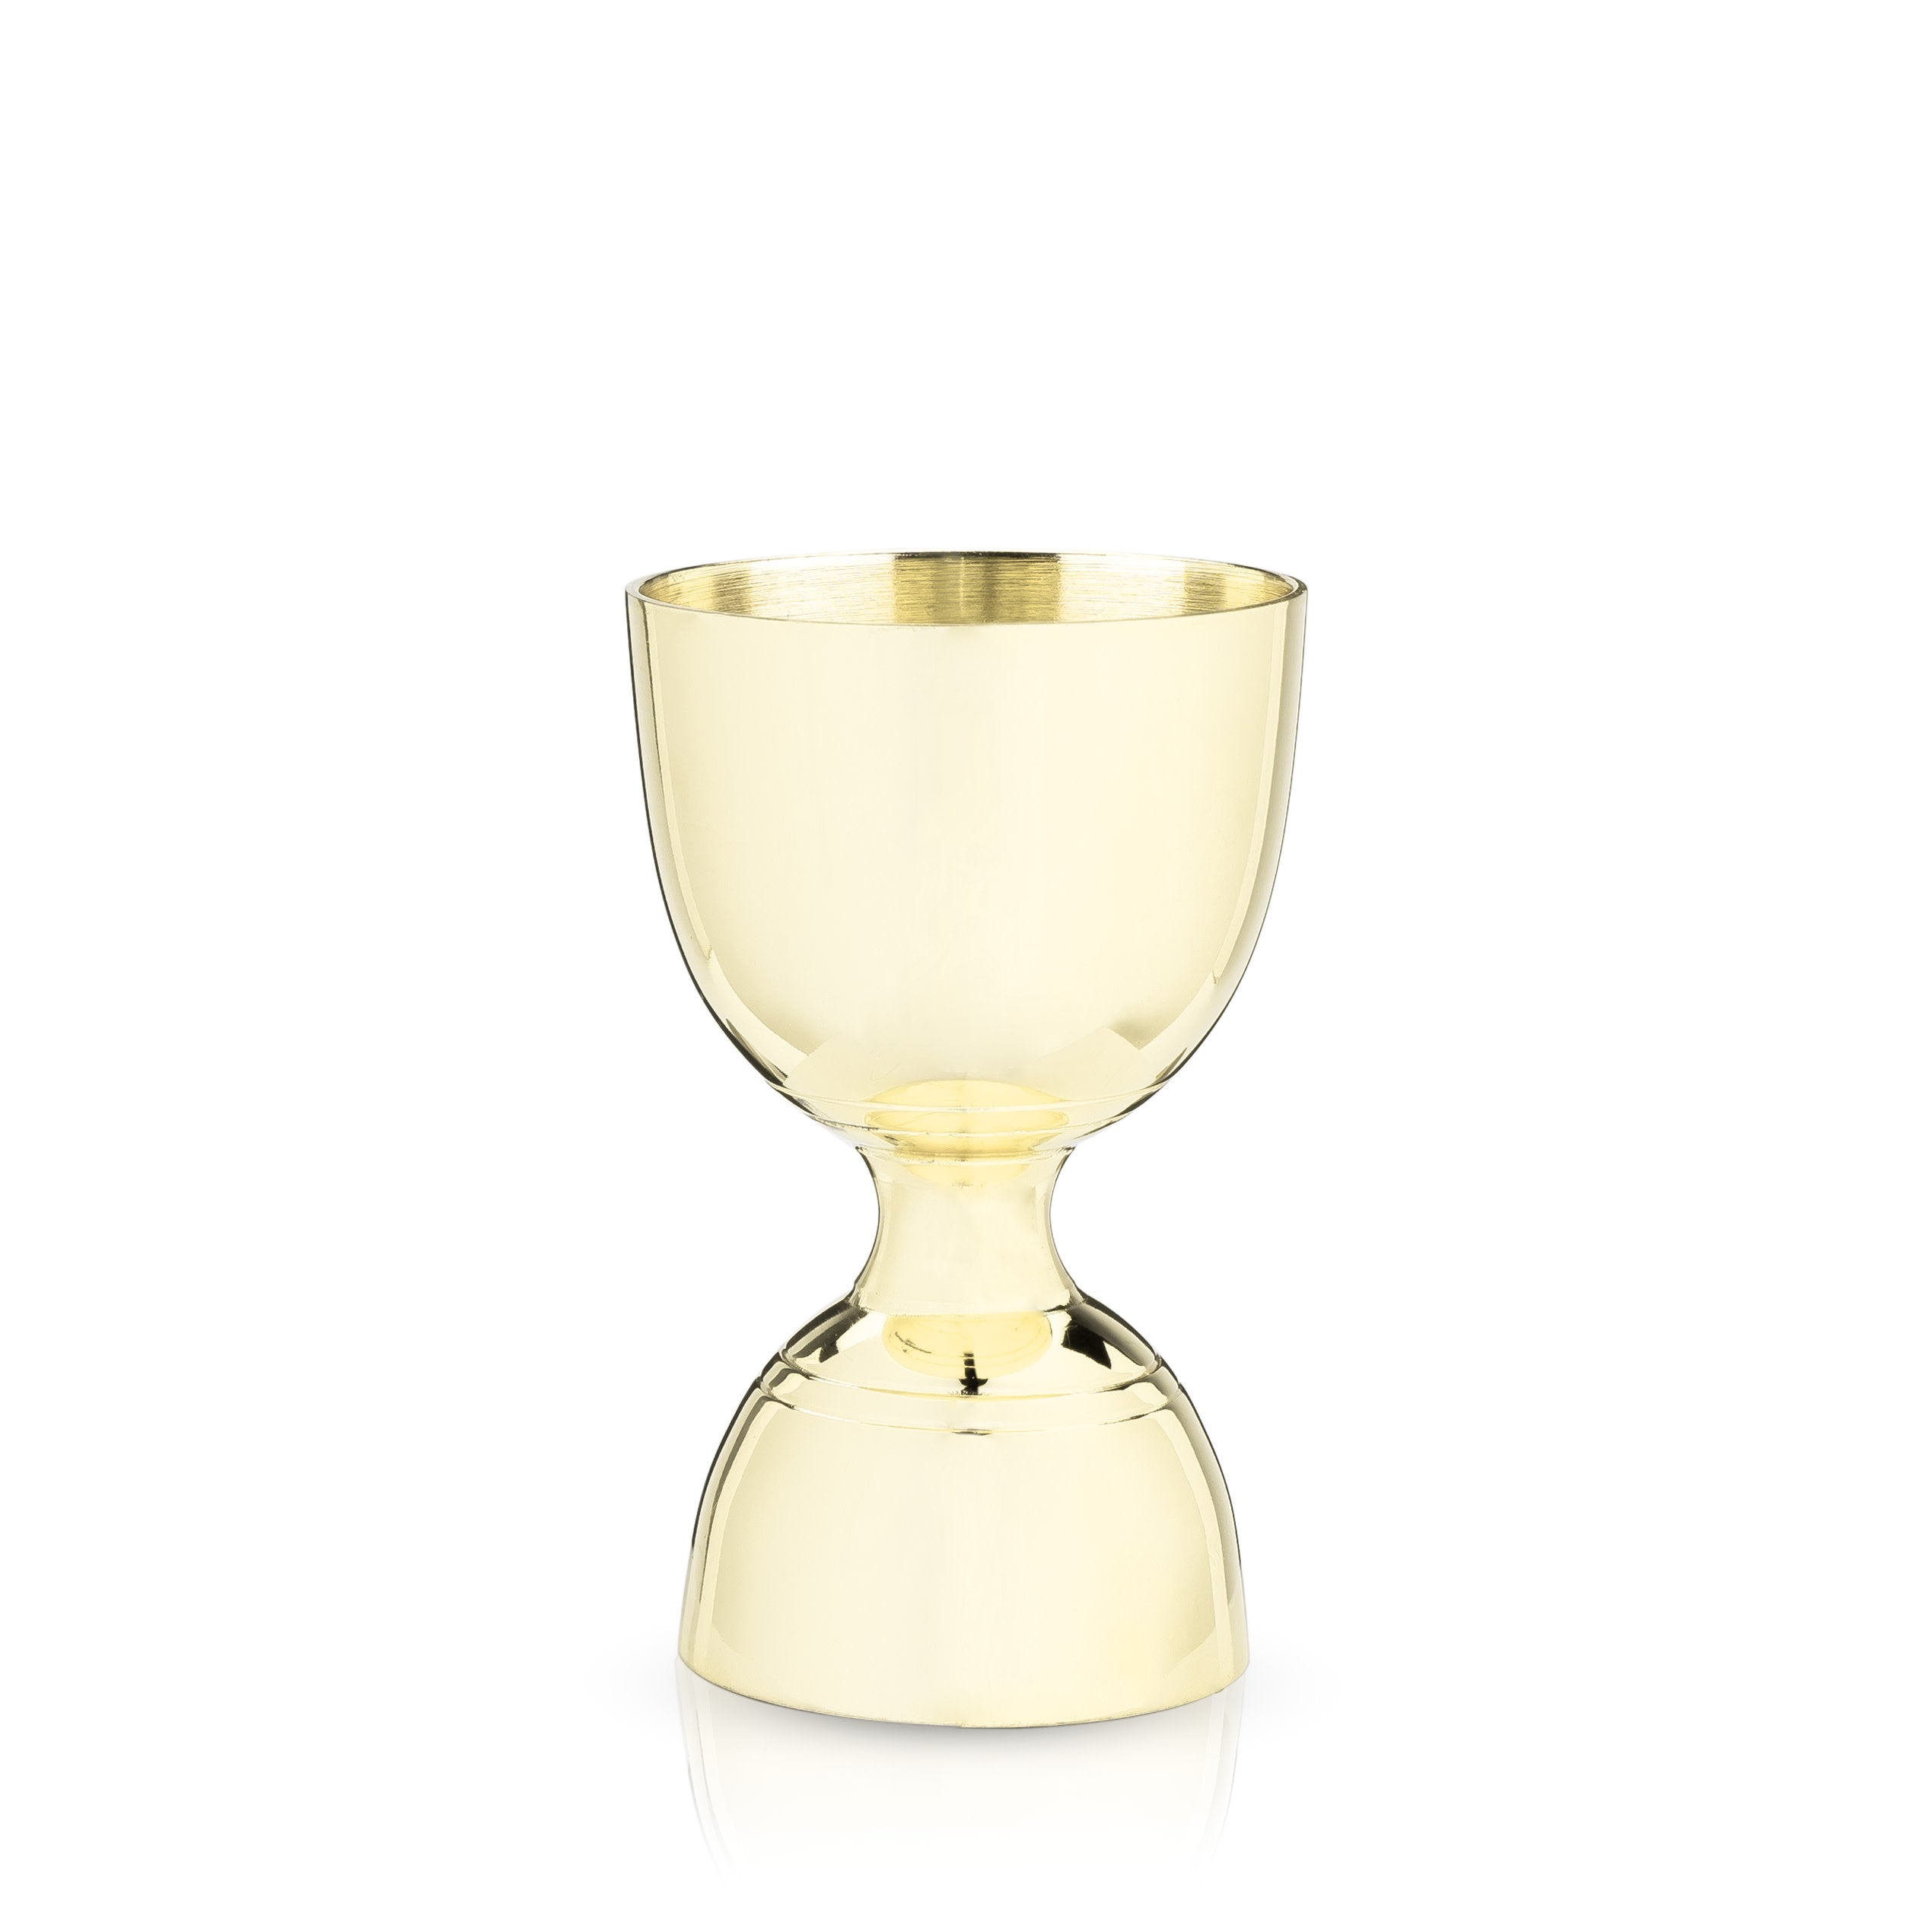 Wholesale Gold Plated Deluxe Multi-Scale Measuring Cup 75ml Manufacturer  and Supplier